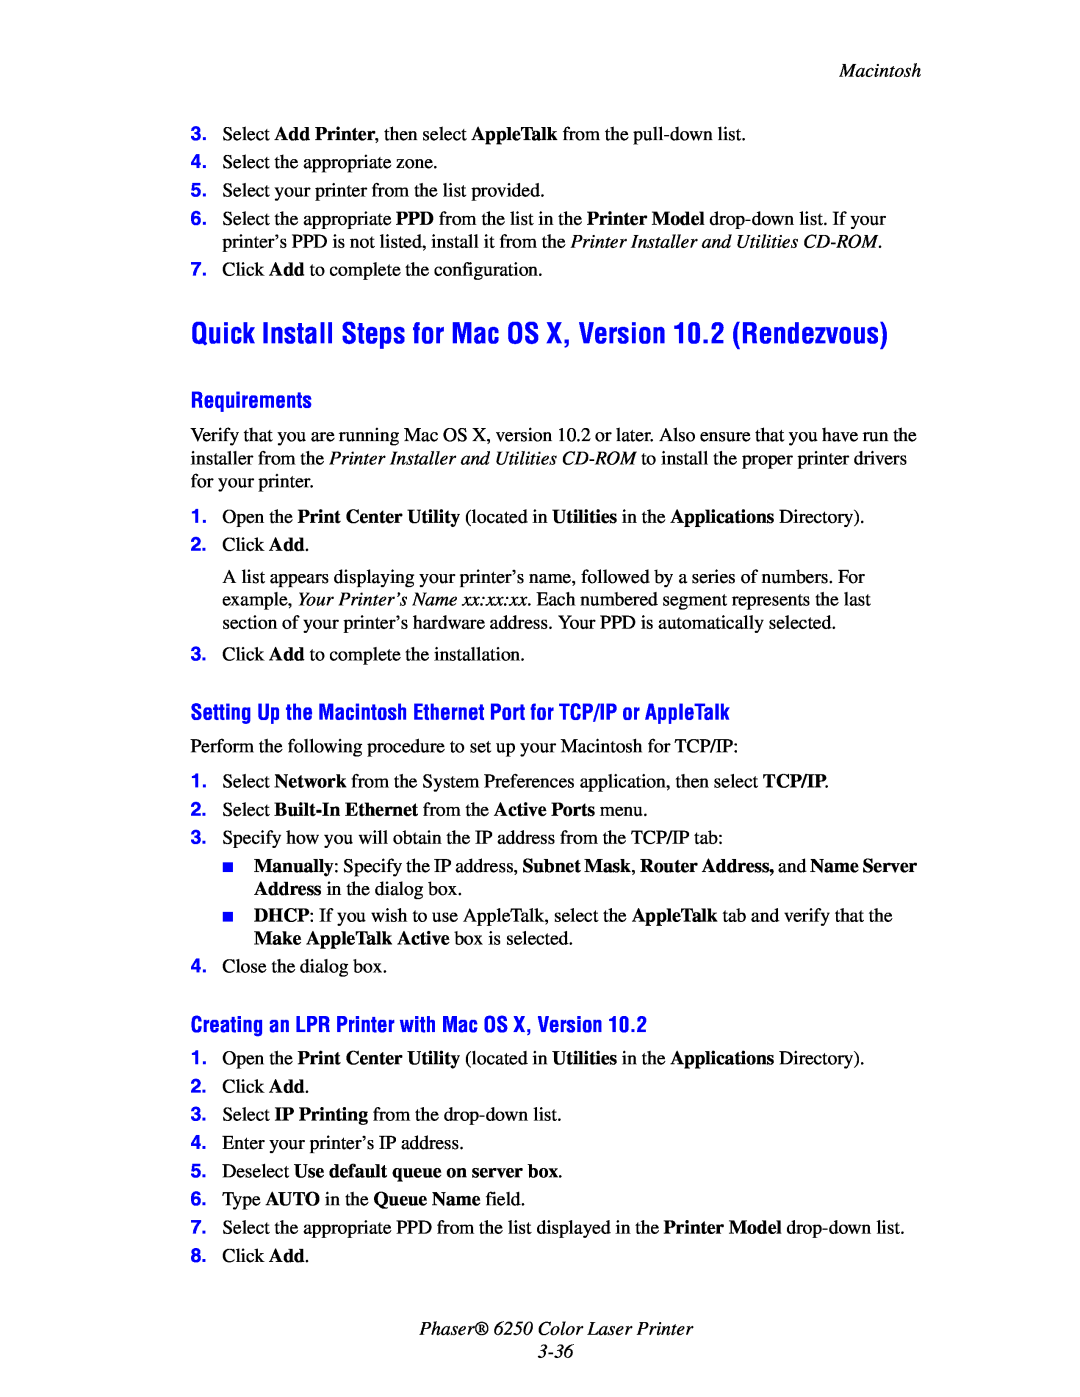 Xerox 6250 Quick Install Steps for Mac OS X, Version 10.2 Rendezvous, Deselect Use default queue on server box, Macintosh 